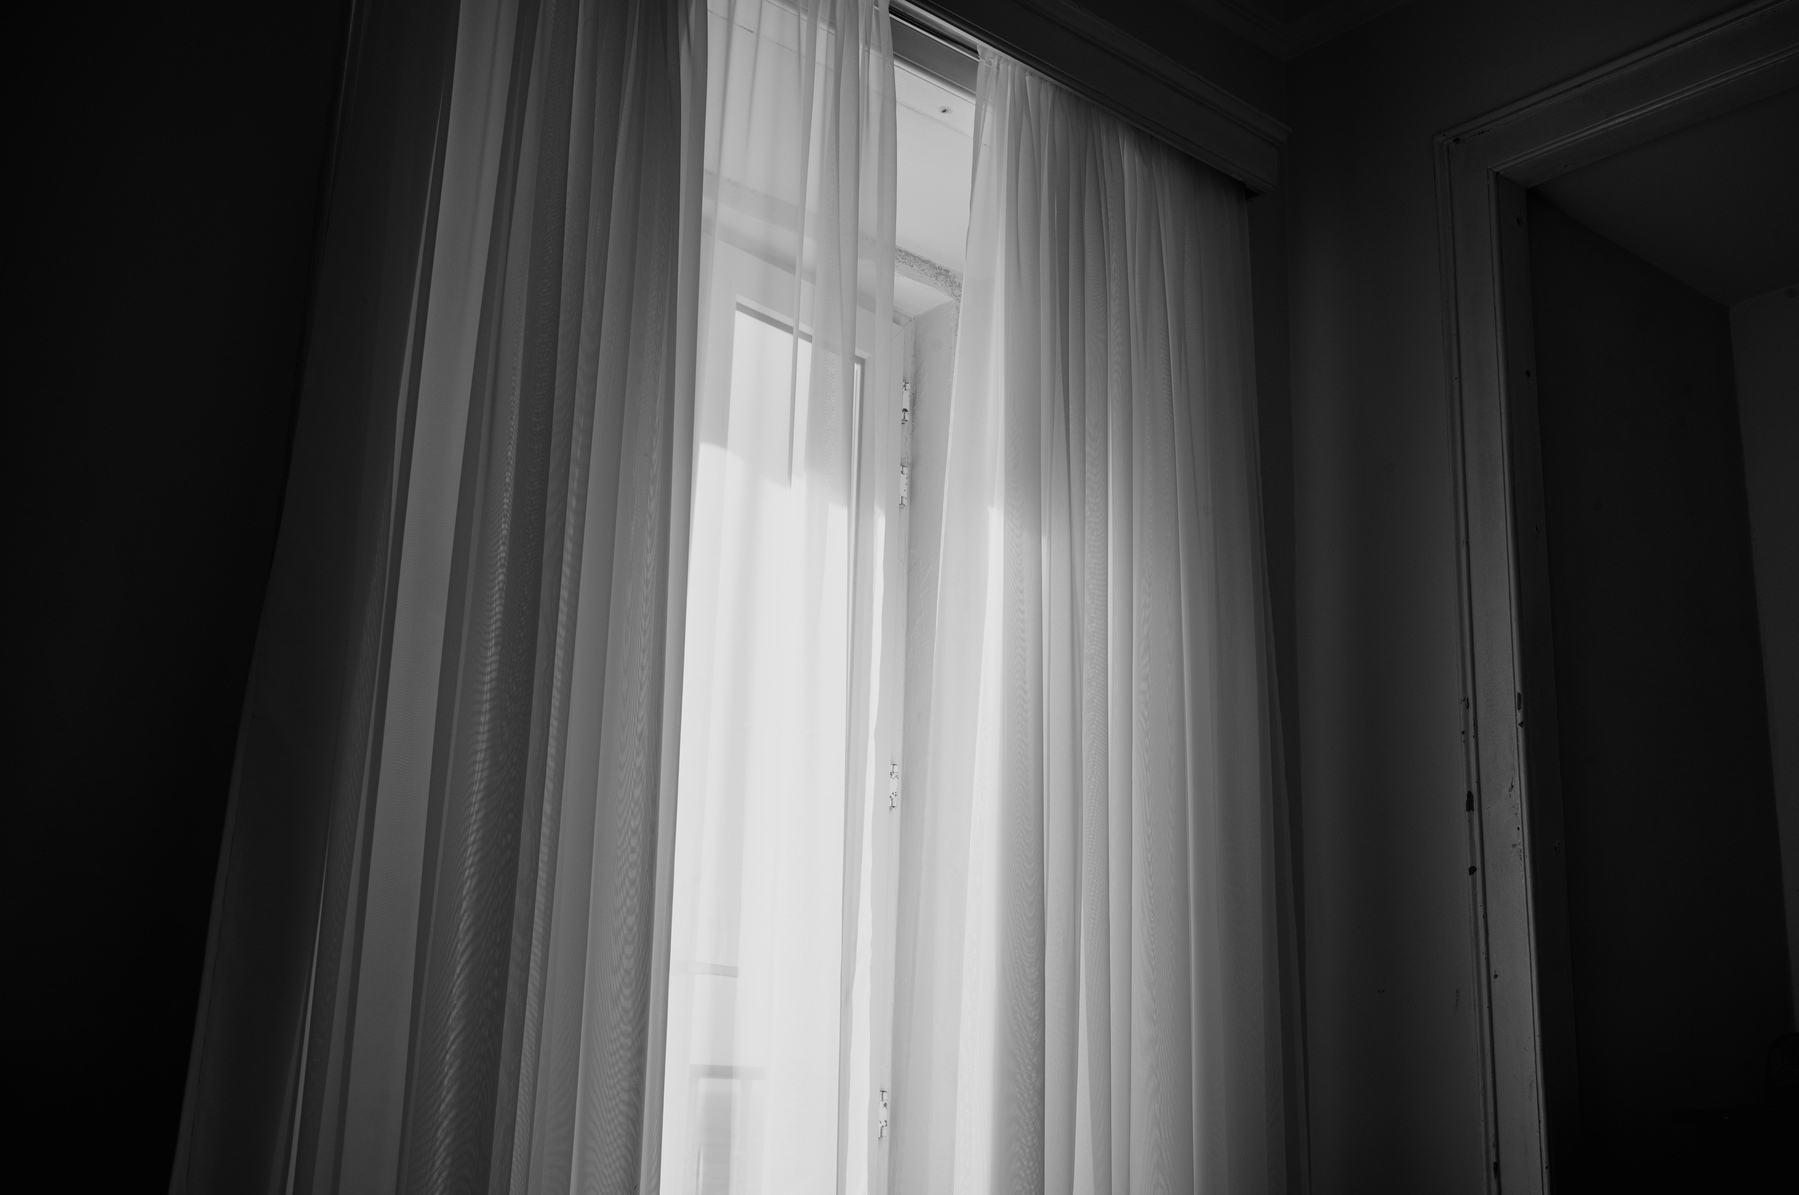 A window with curtains in black and white